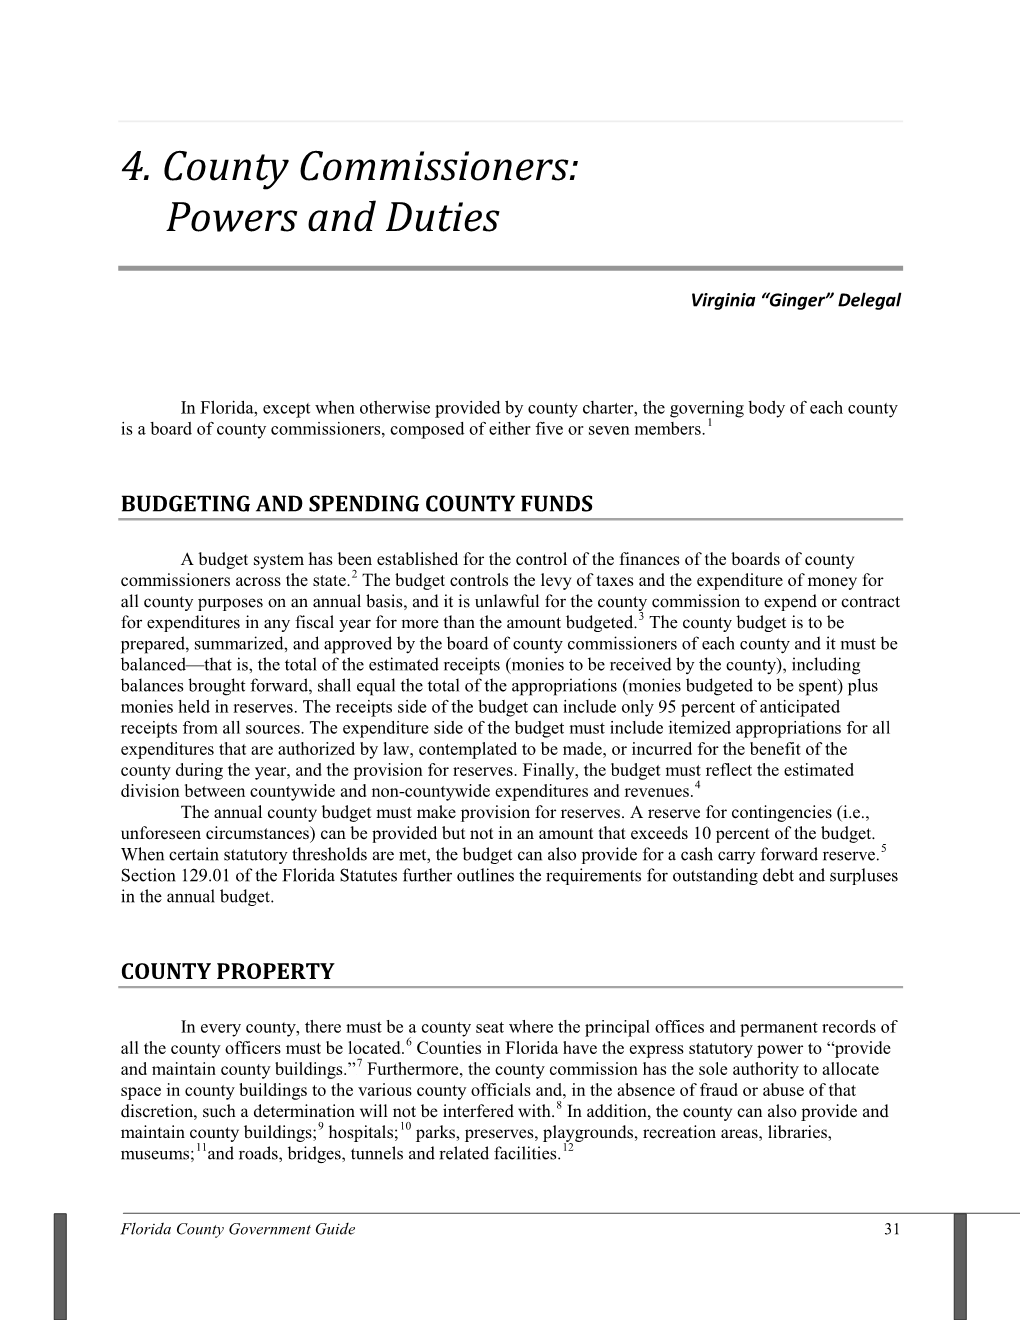 4. County Commissioners: Powers and Duties